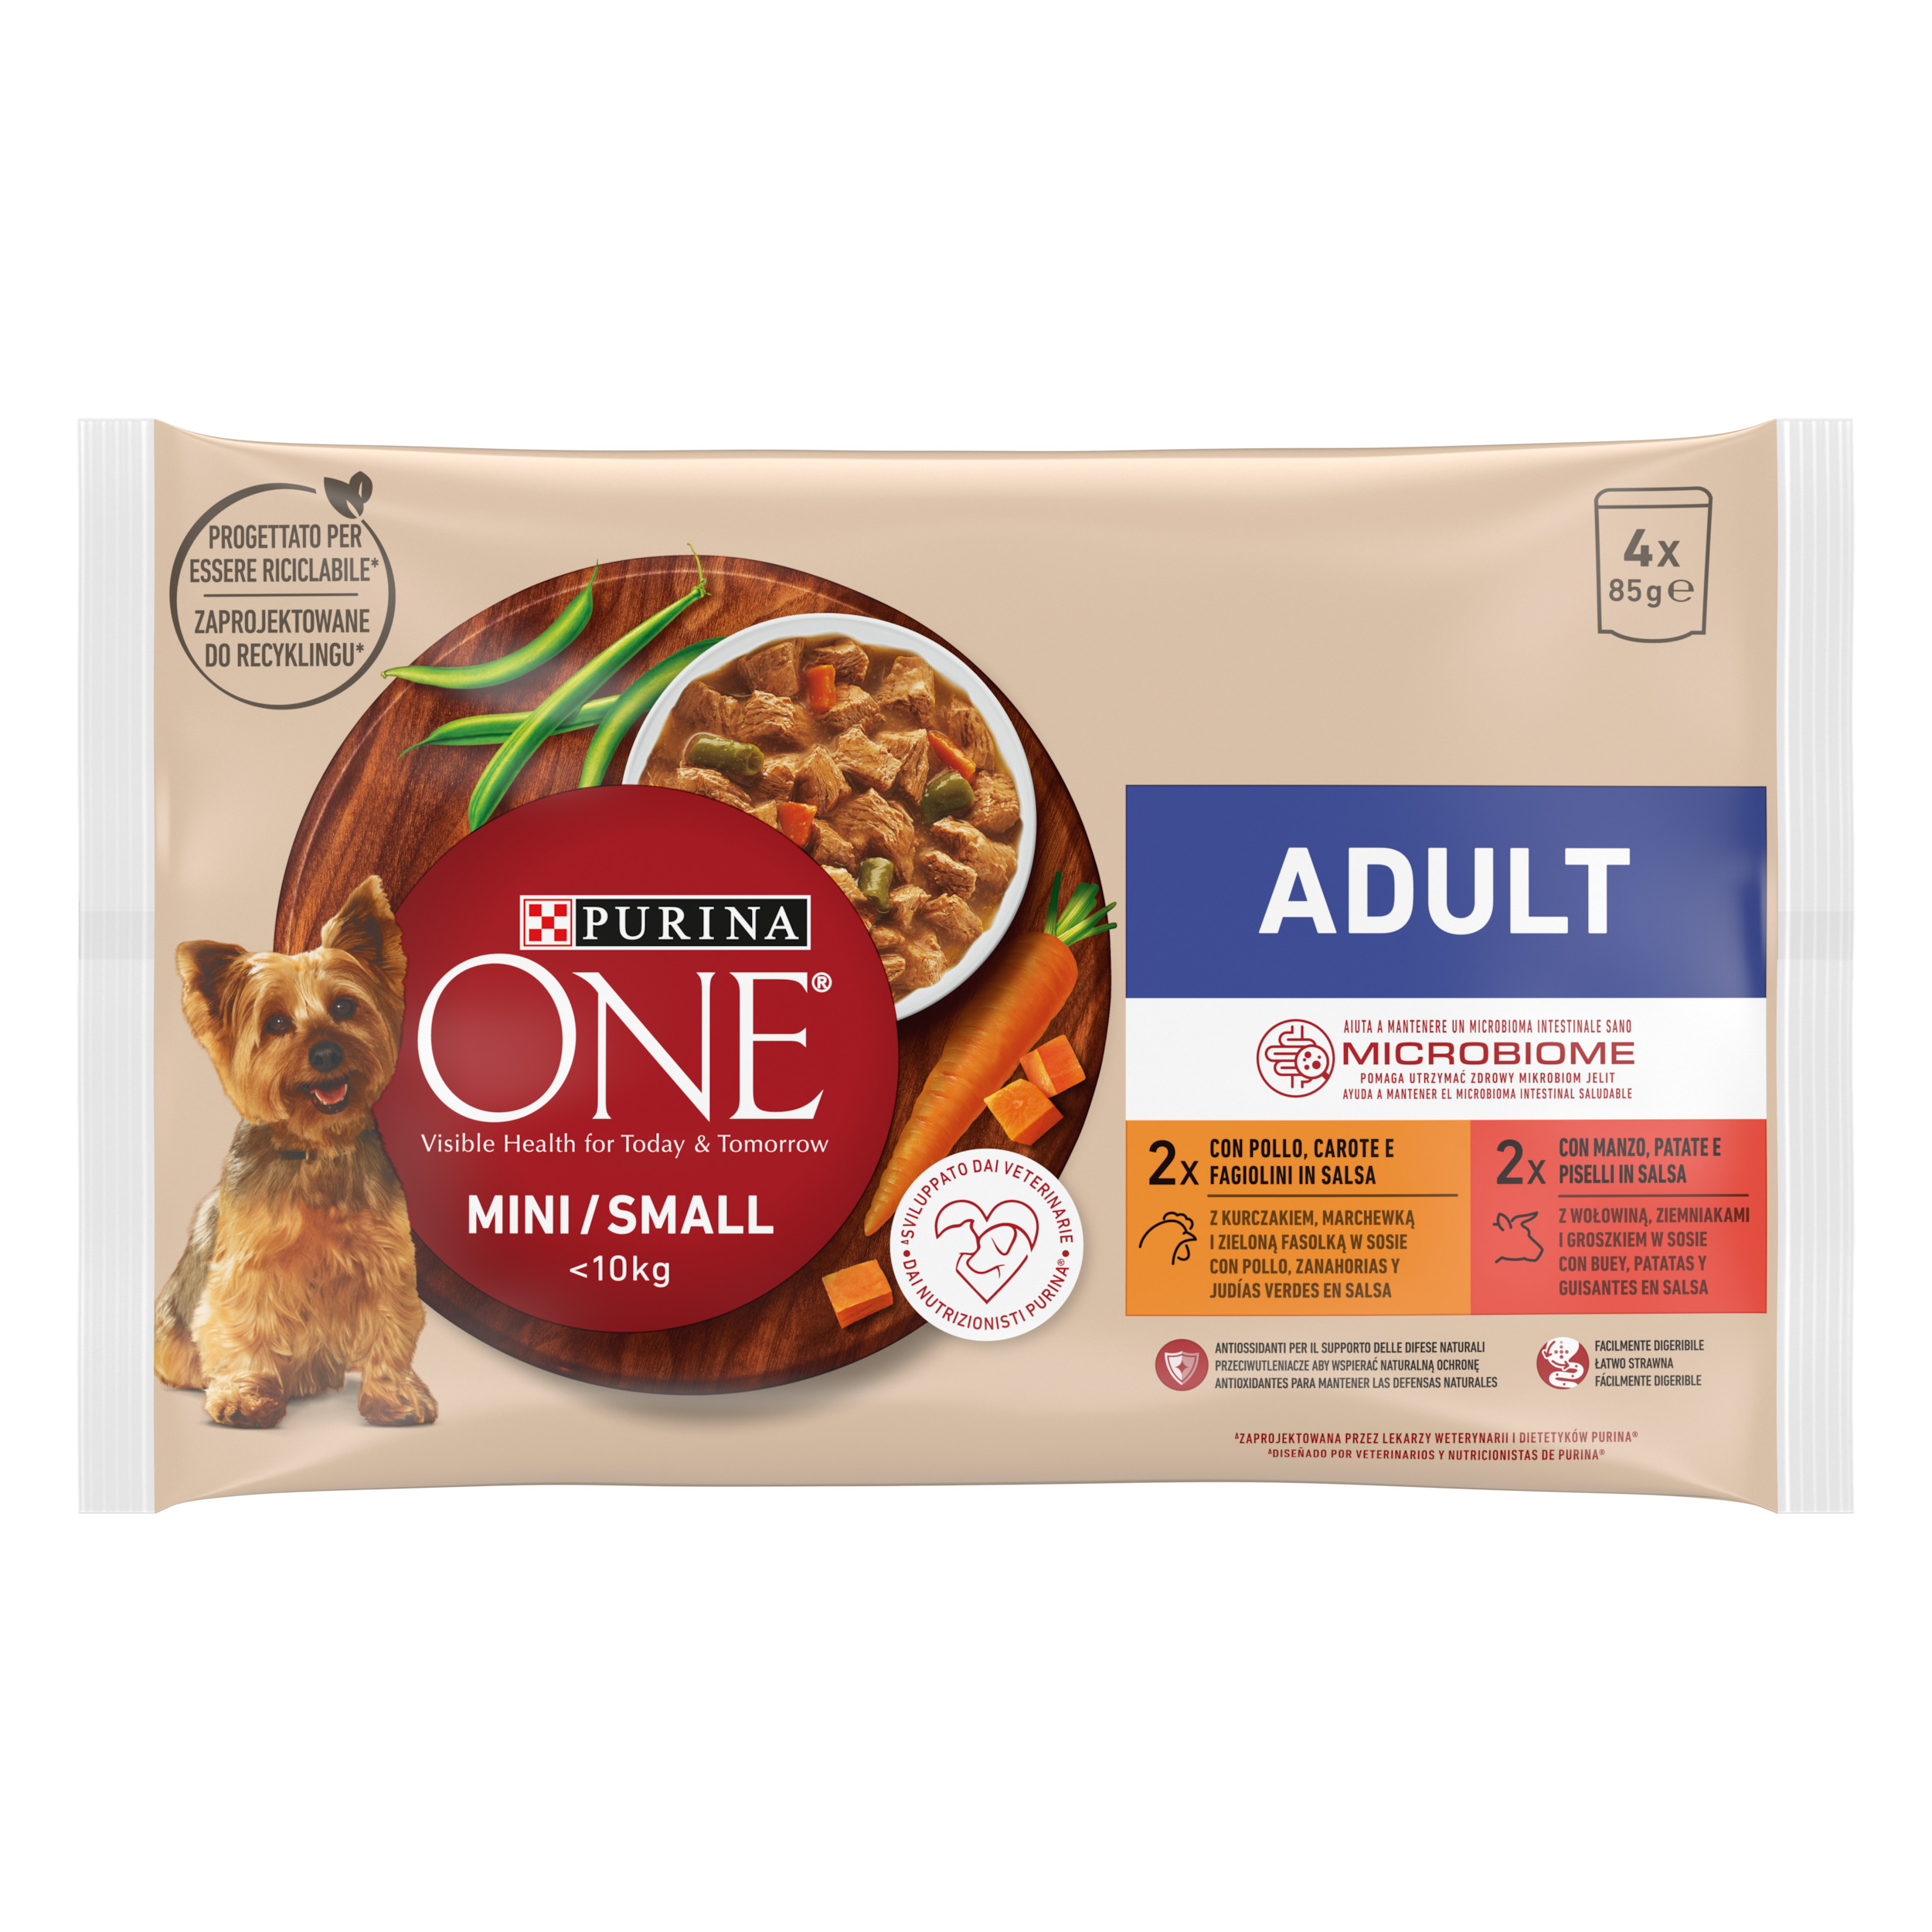 Purina ONE Beef & Chicken Variety with Vegetables Wet Food for Mini & Small Adult Dogs 4x85g